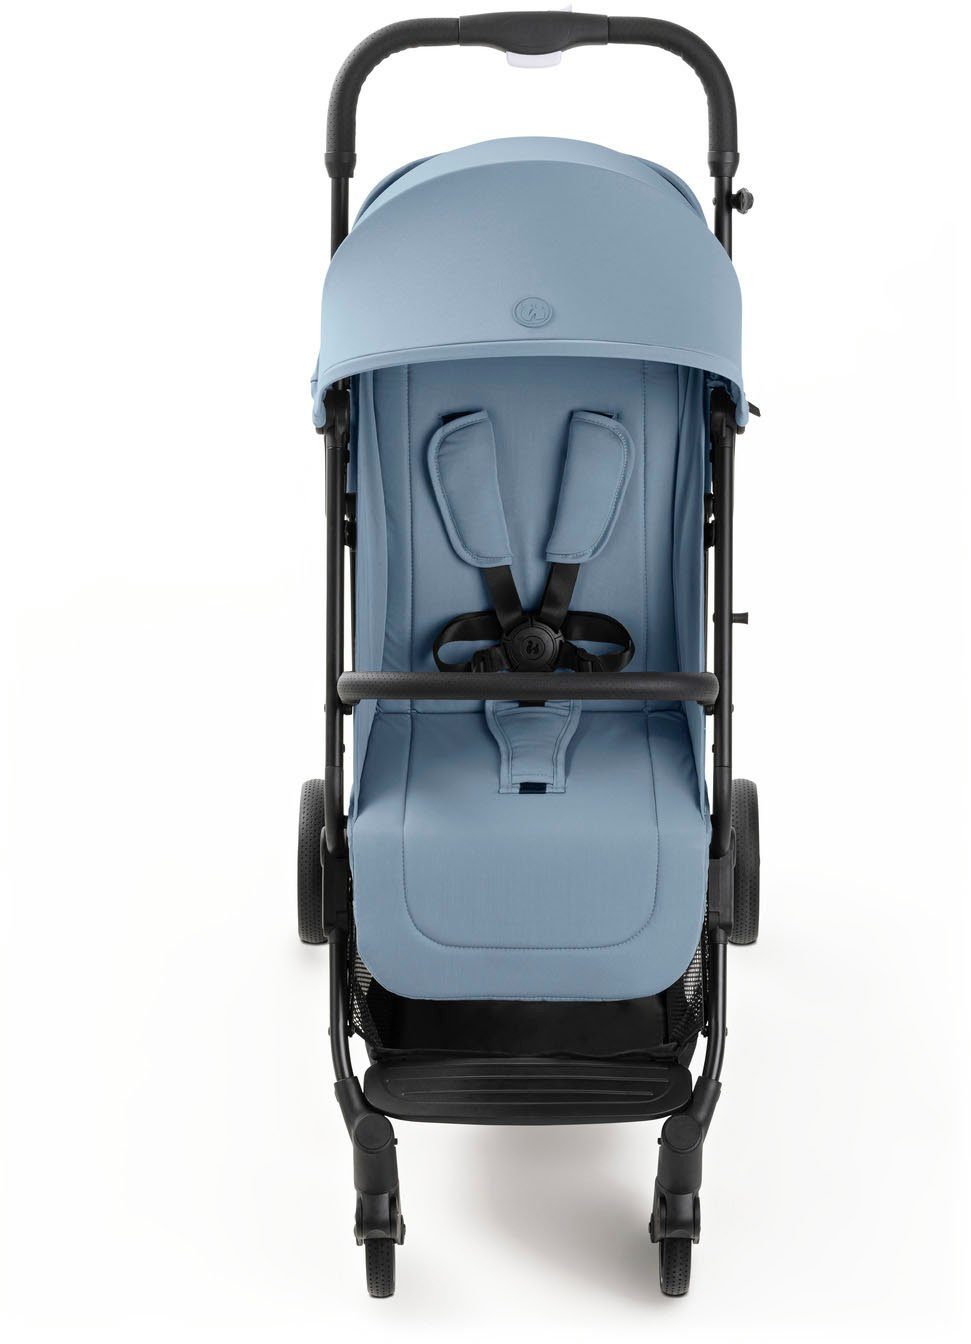 N Travel Care Hauck Dusty Kinder-Buggy Plus, Blue